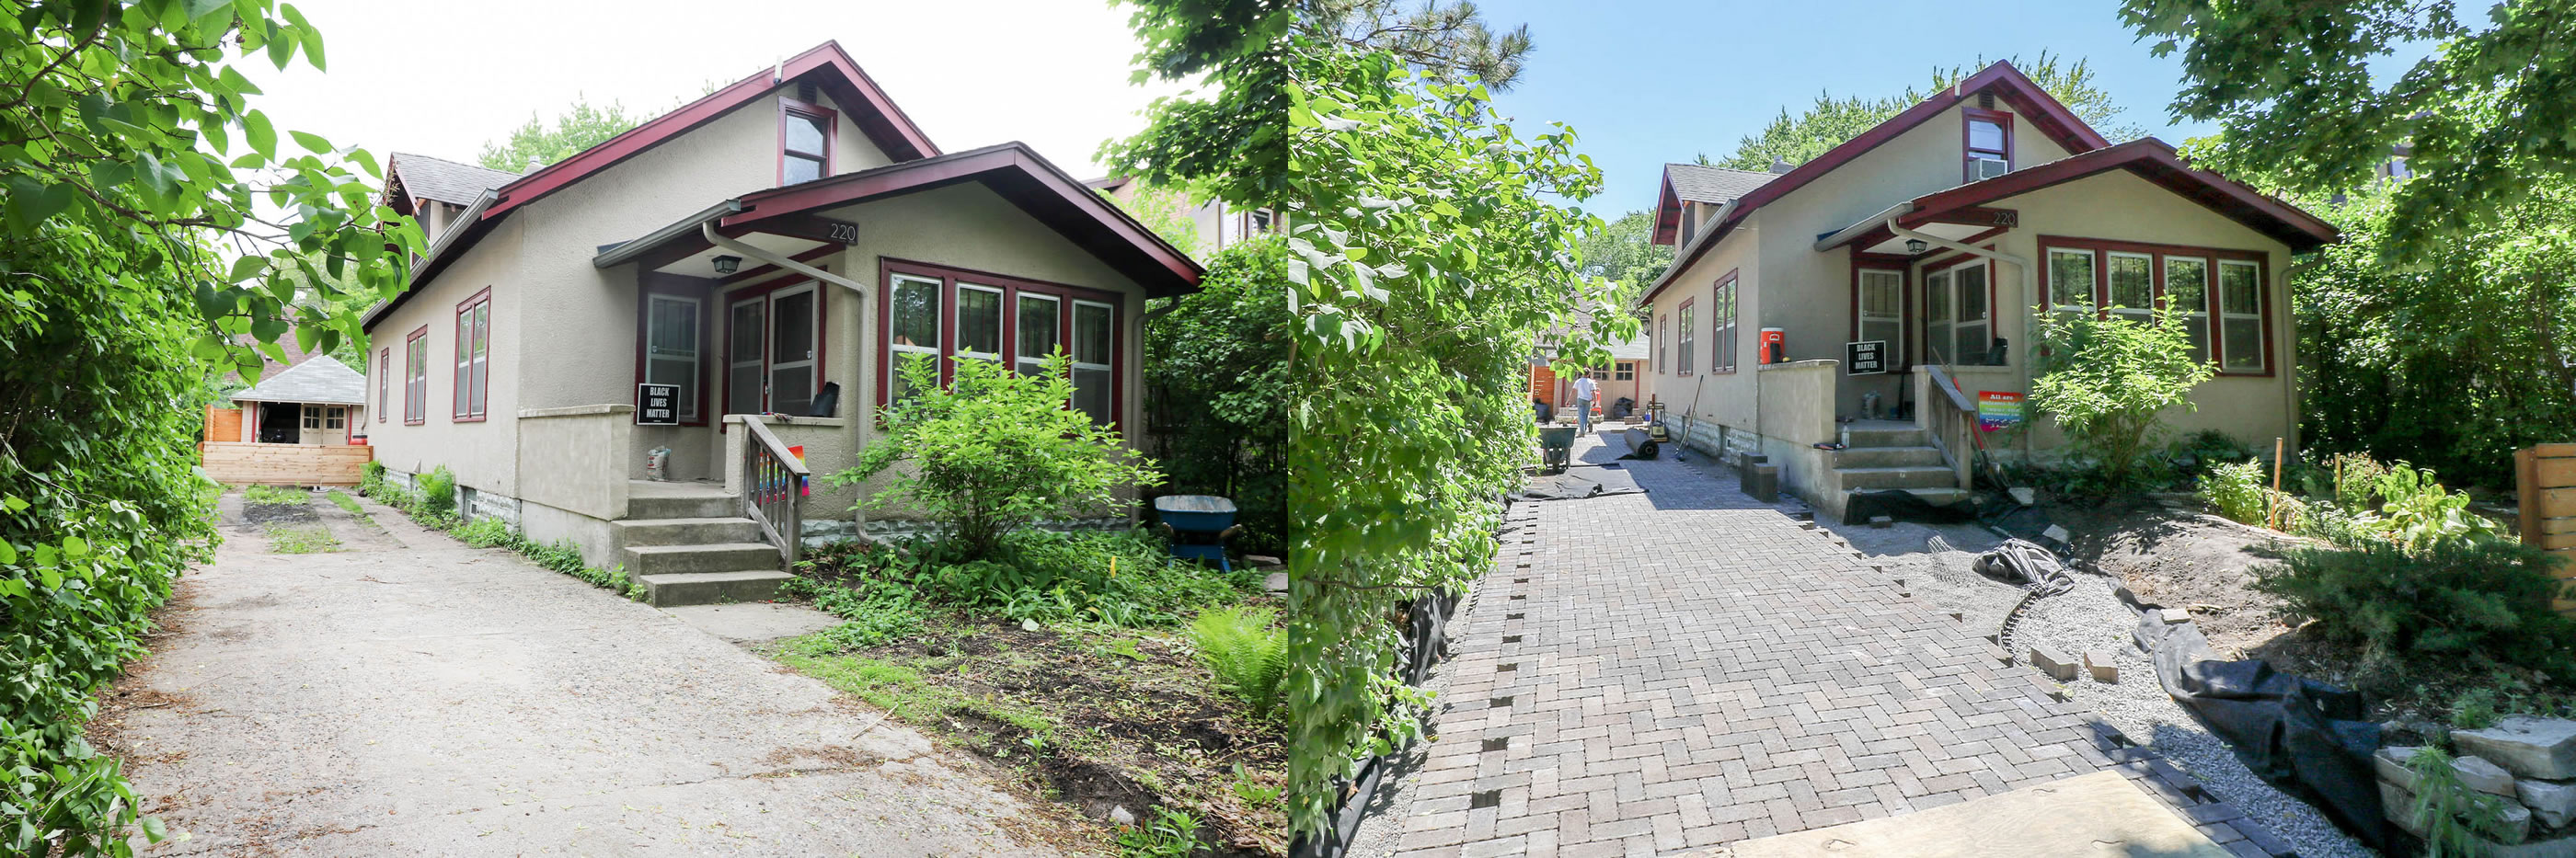 On the left, Tessa Anttila’s concrete driveway made it difficult for rainwater to absorb into the ground. A permeable paver driveway (right) allows water to flow through the bricks and soak into the soil. 